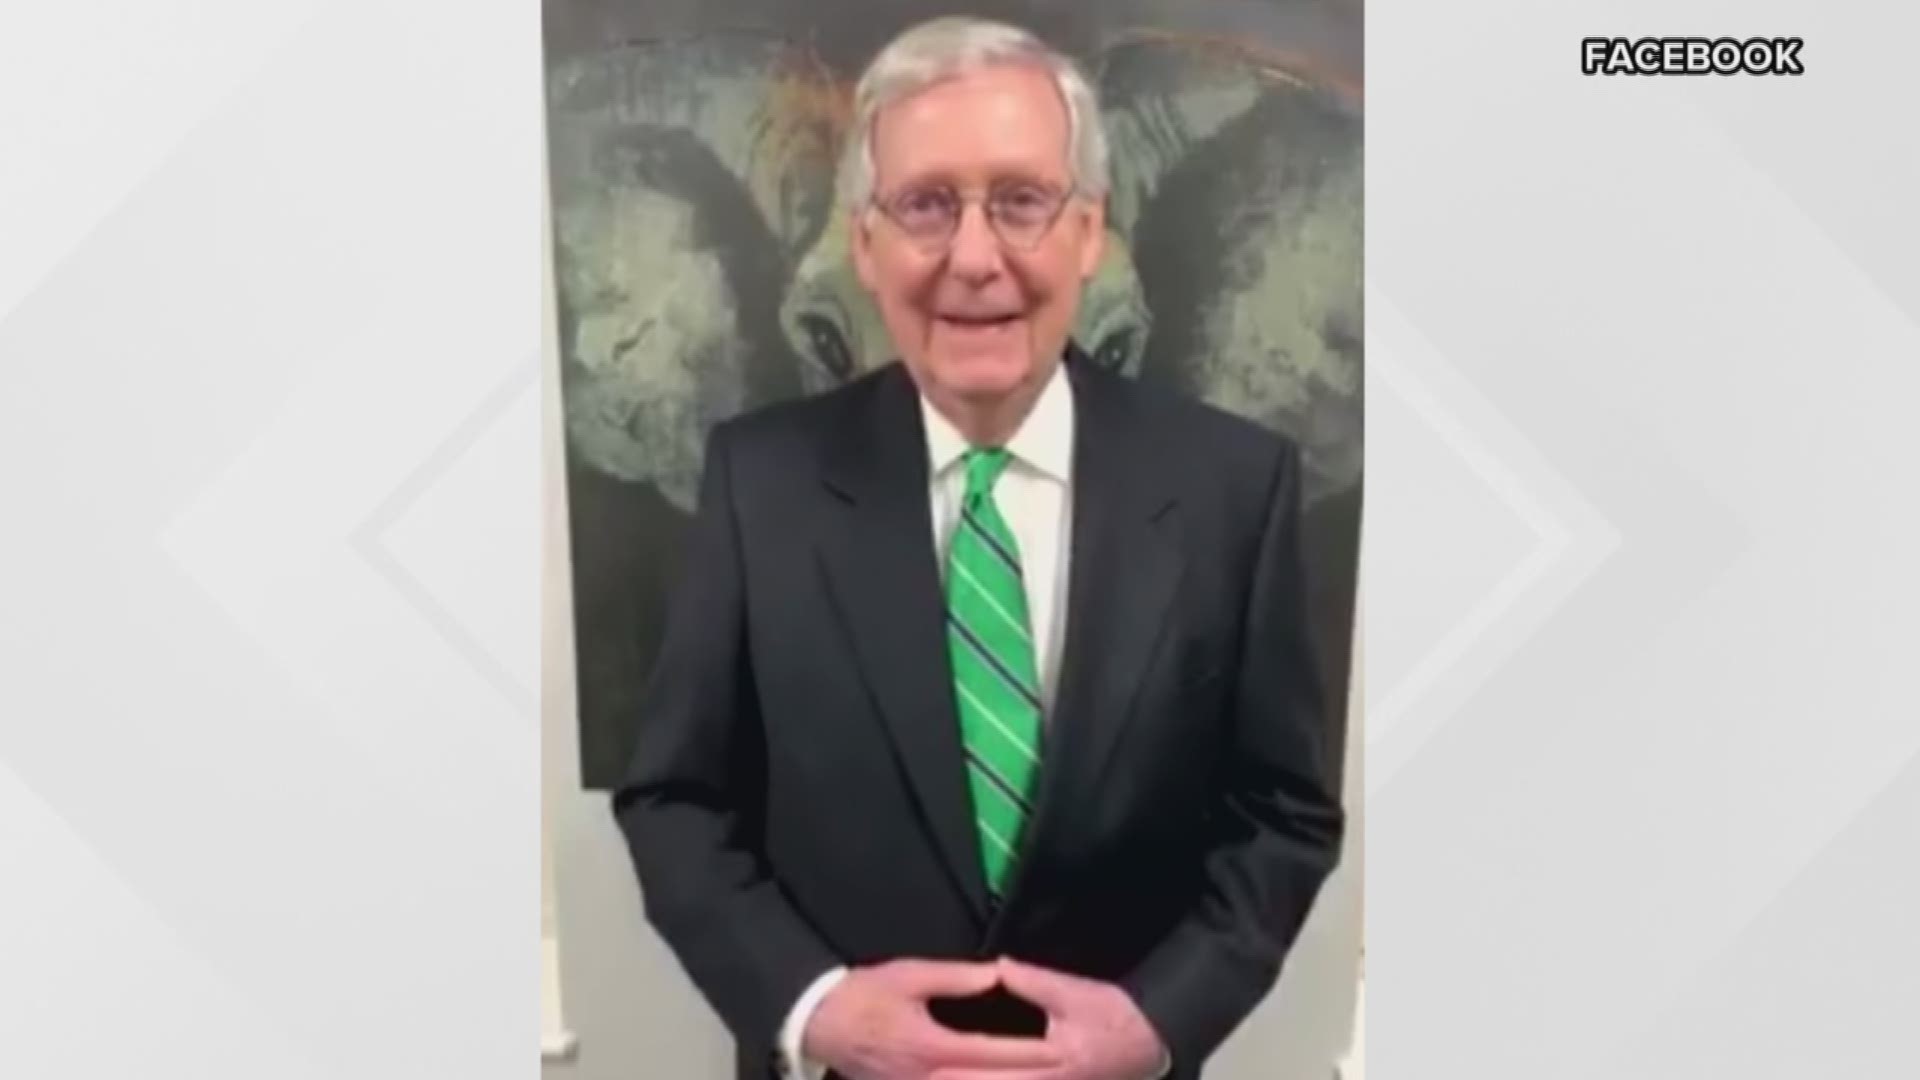 McConnell is running for reelection next year and is a steadfast supporter of President Donald Trump.